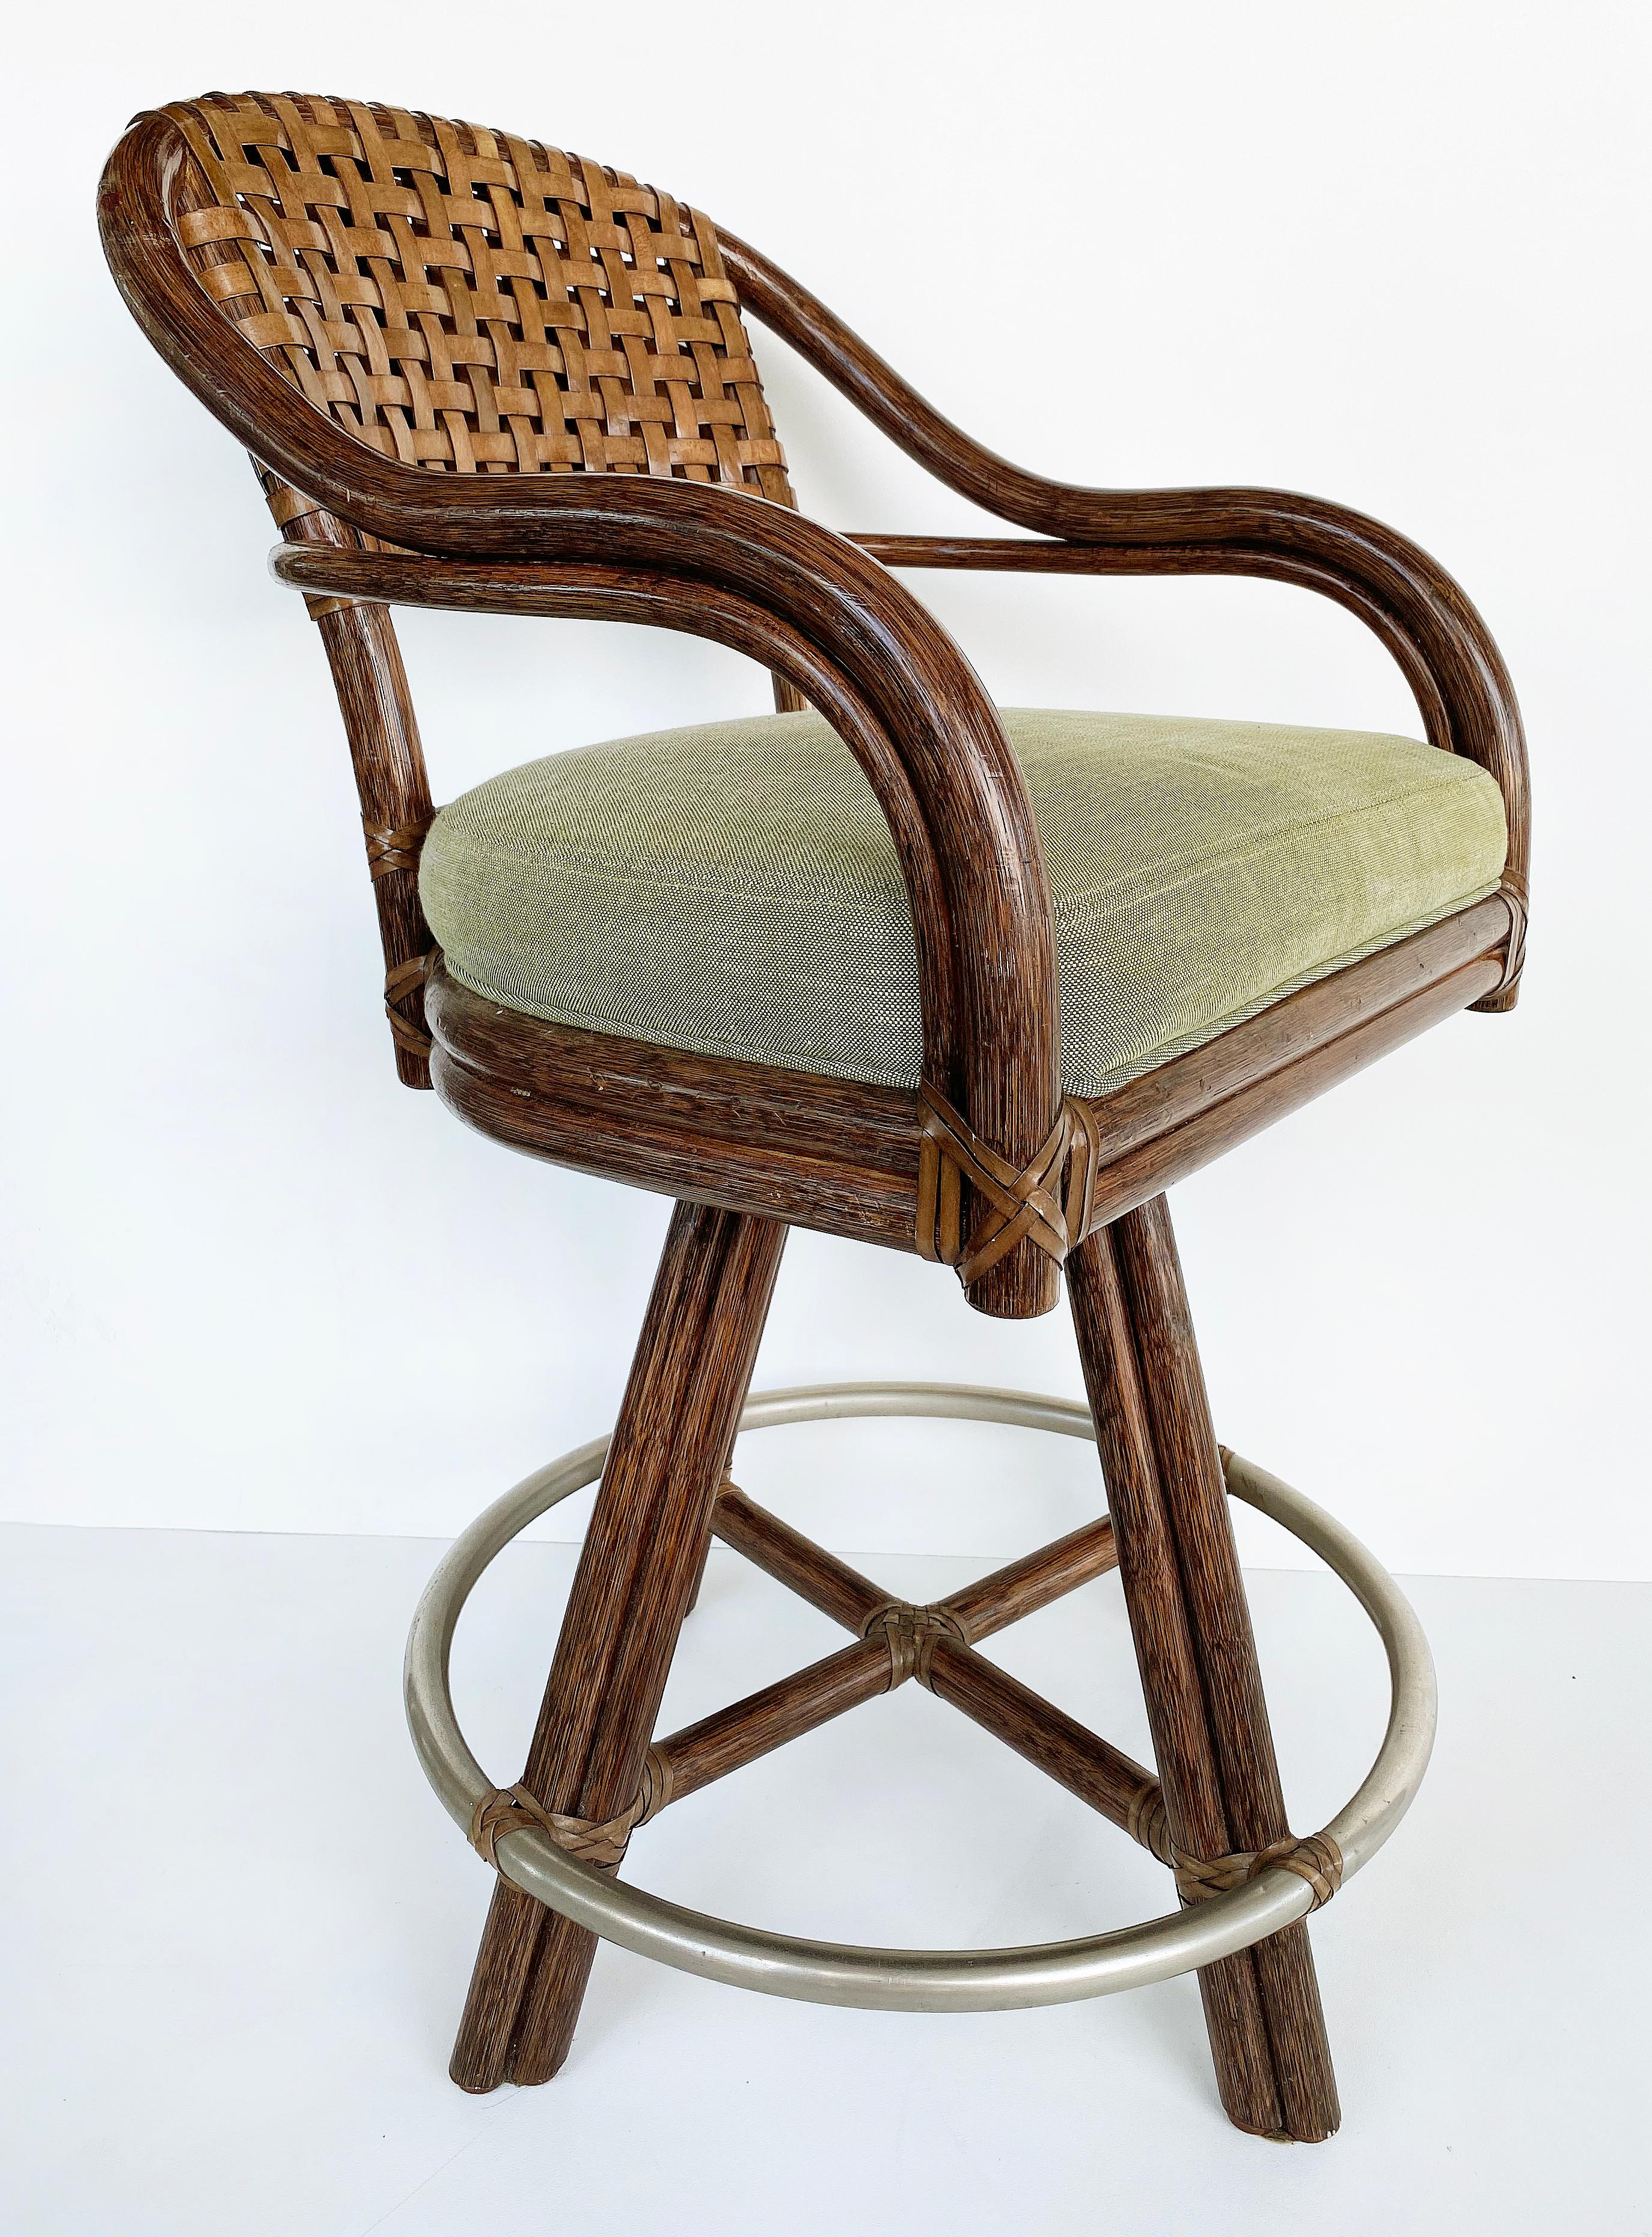 McGuire San Francisco Rattan, Rawhide swivel stools, pair

Offered for sale is a pair of swivel bar stools manufactured by McGuire of San Francisco. The frames of these stools are made of rattan with upholstered seat cushions. The curved backs